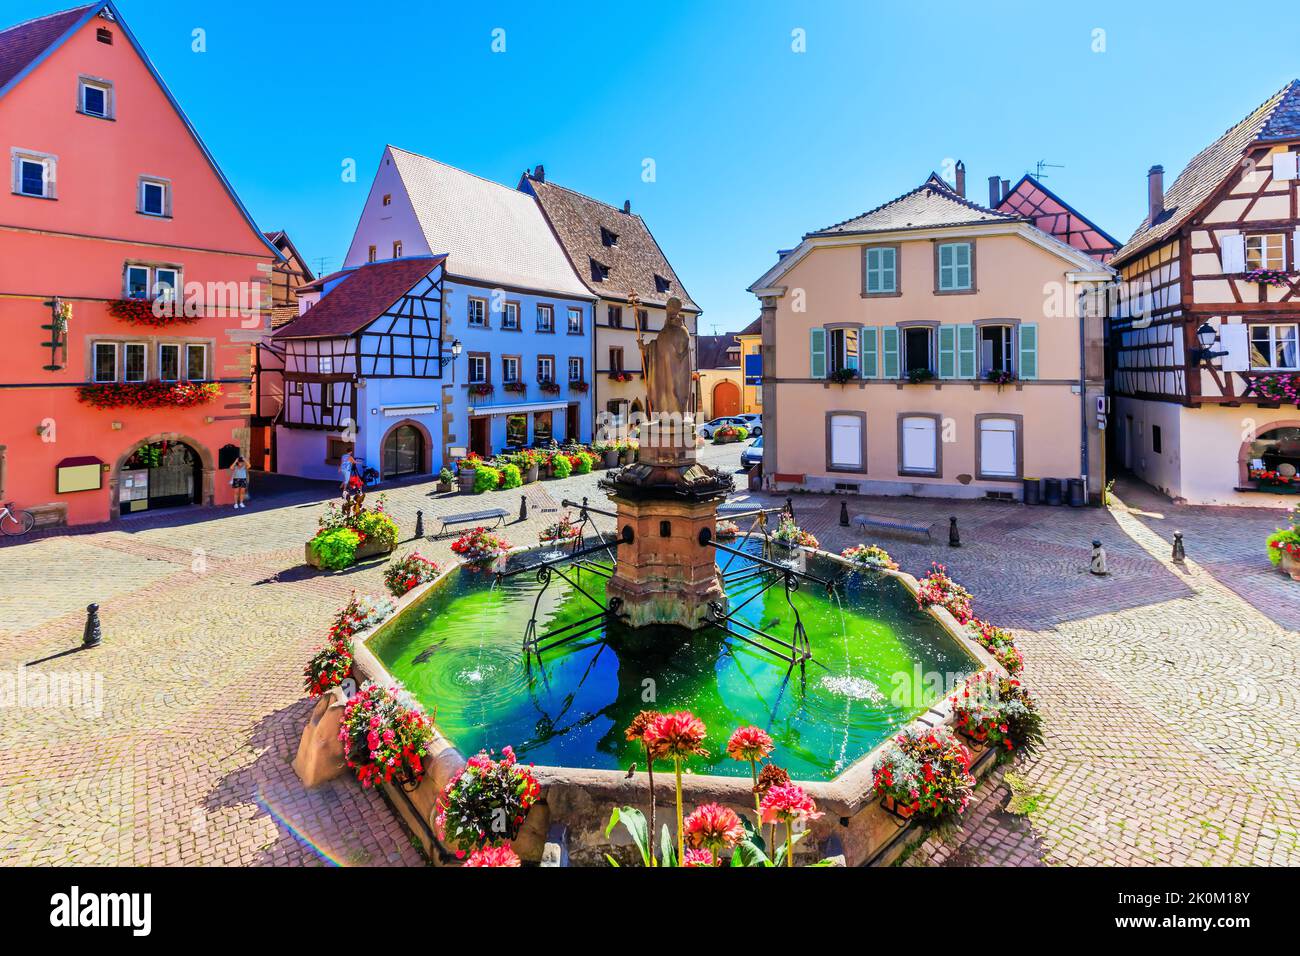 Eguisheim, France. Colorful half-timbered houses in Castle Square, Alsace. Stock Photo